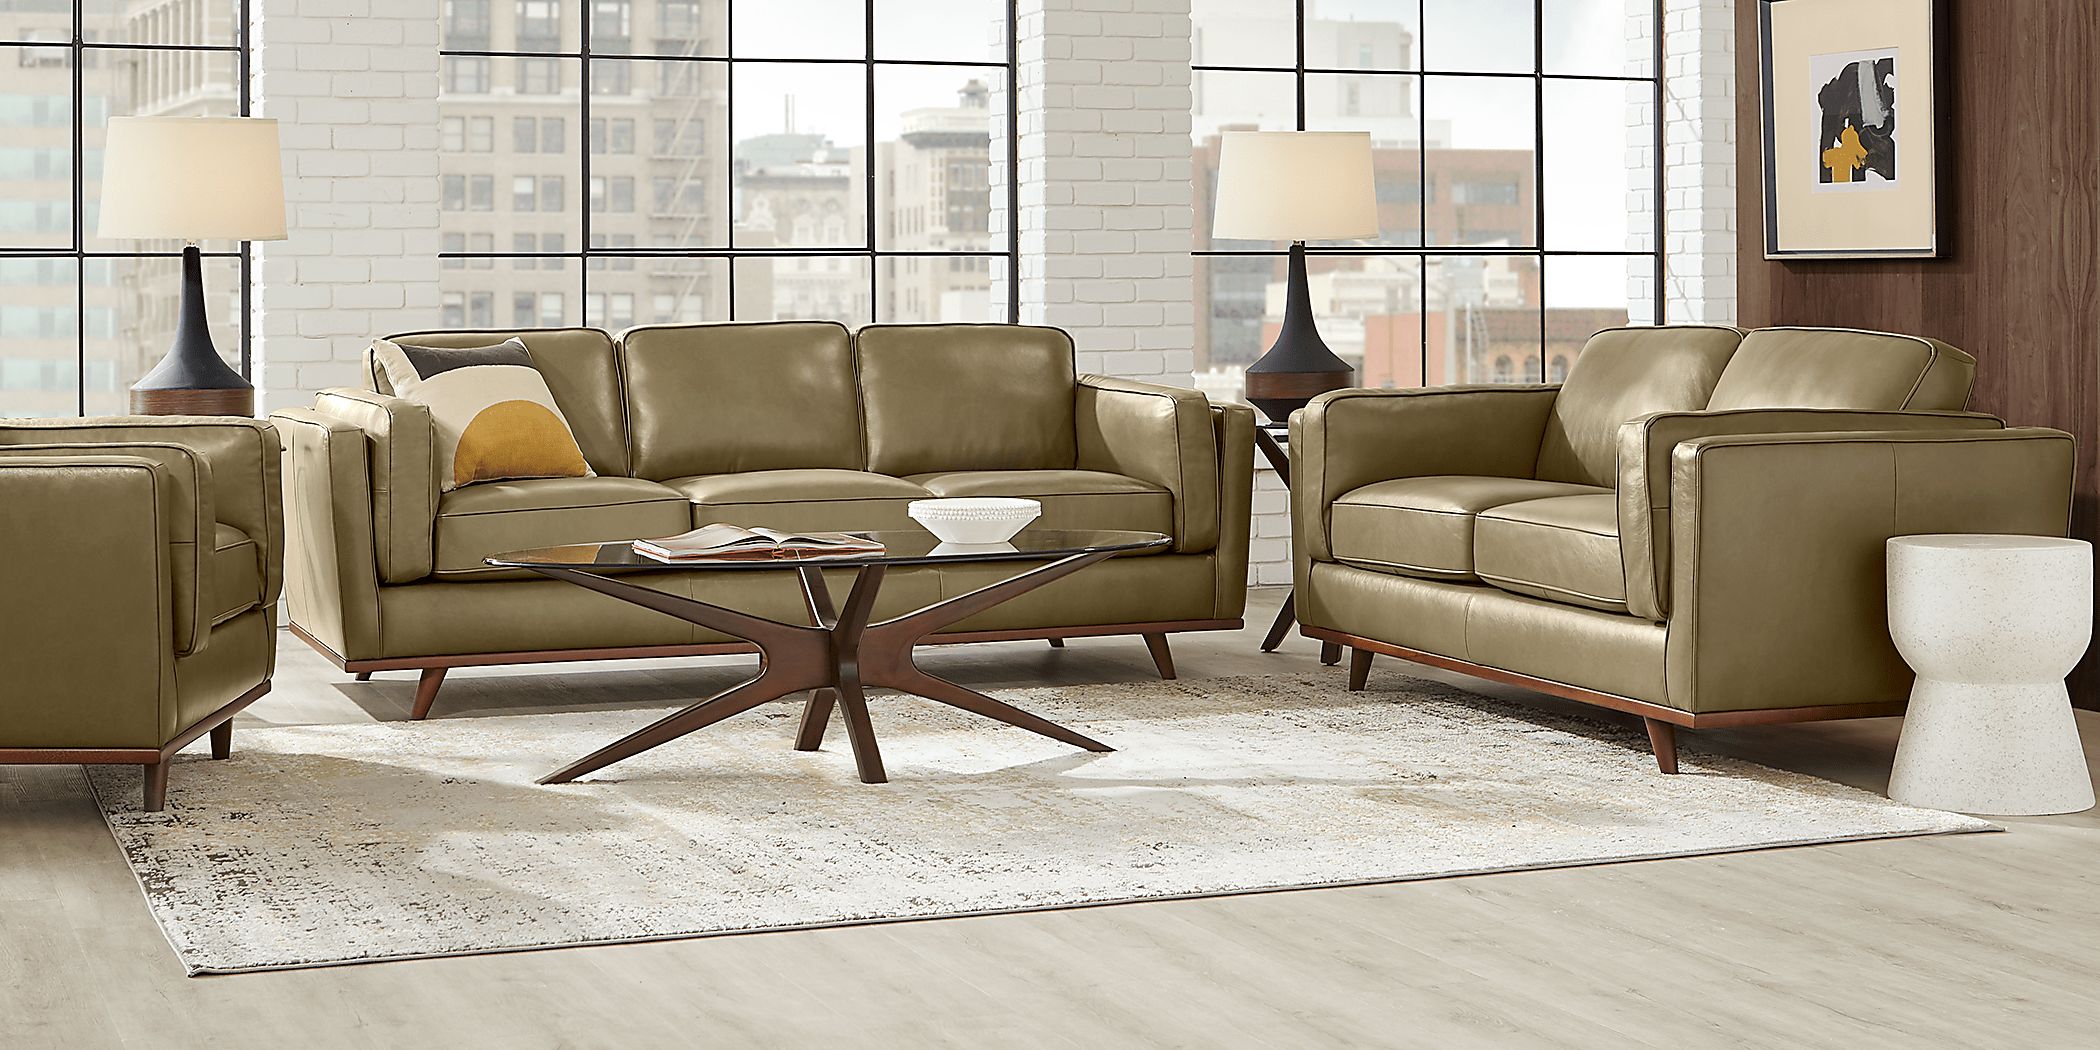 Duluth Olive Leather 7 Pc Living Room with Gel Foam Sleeper Sofa